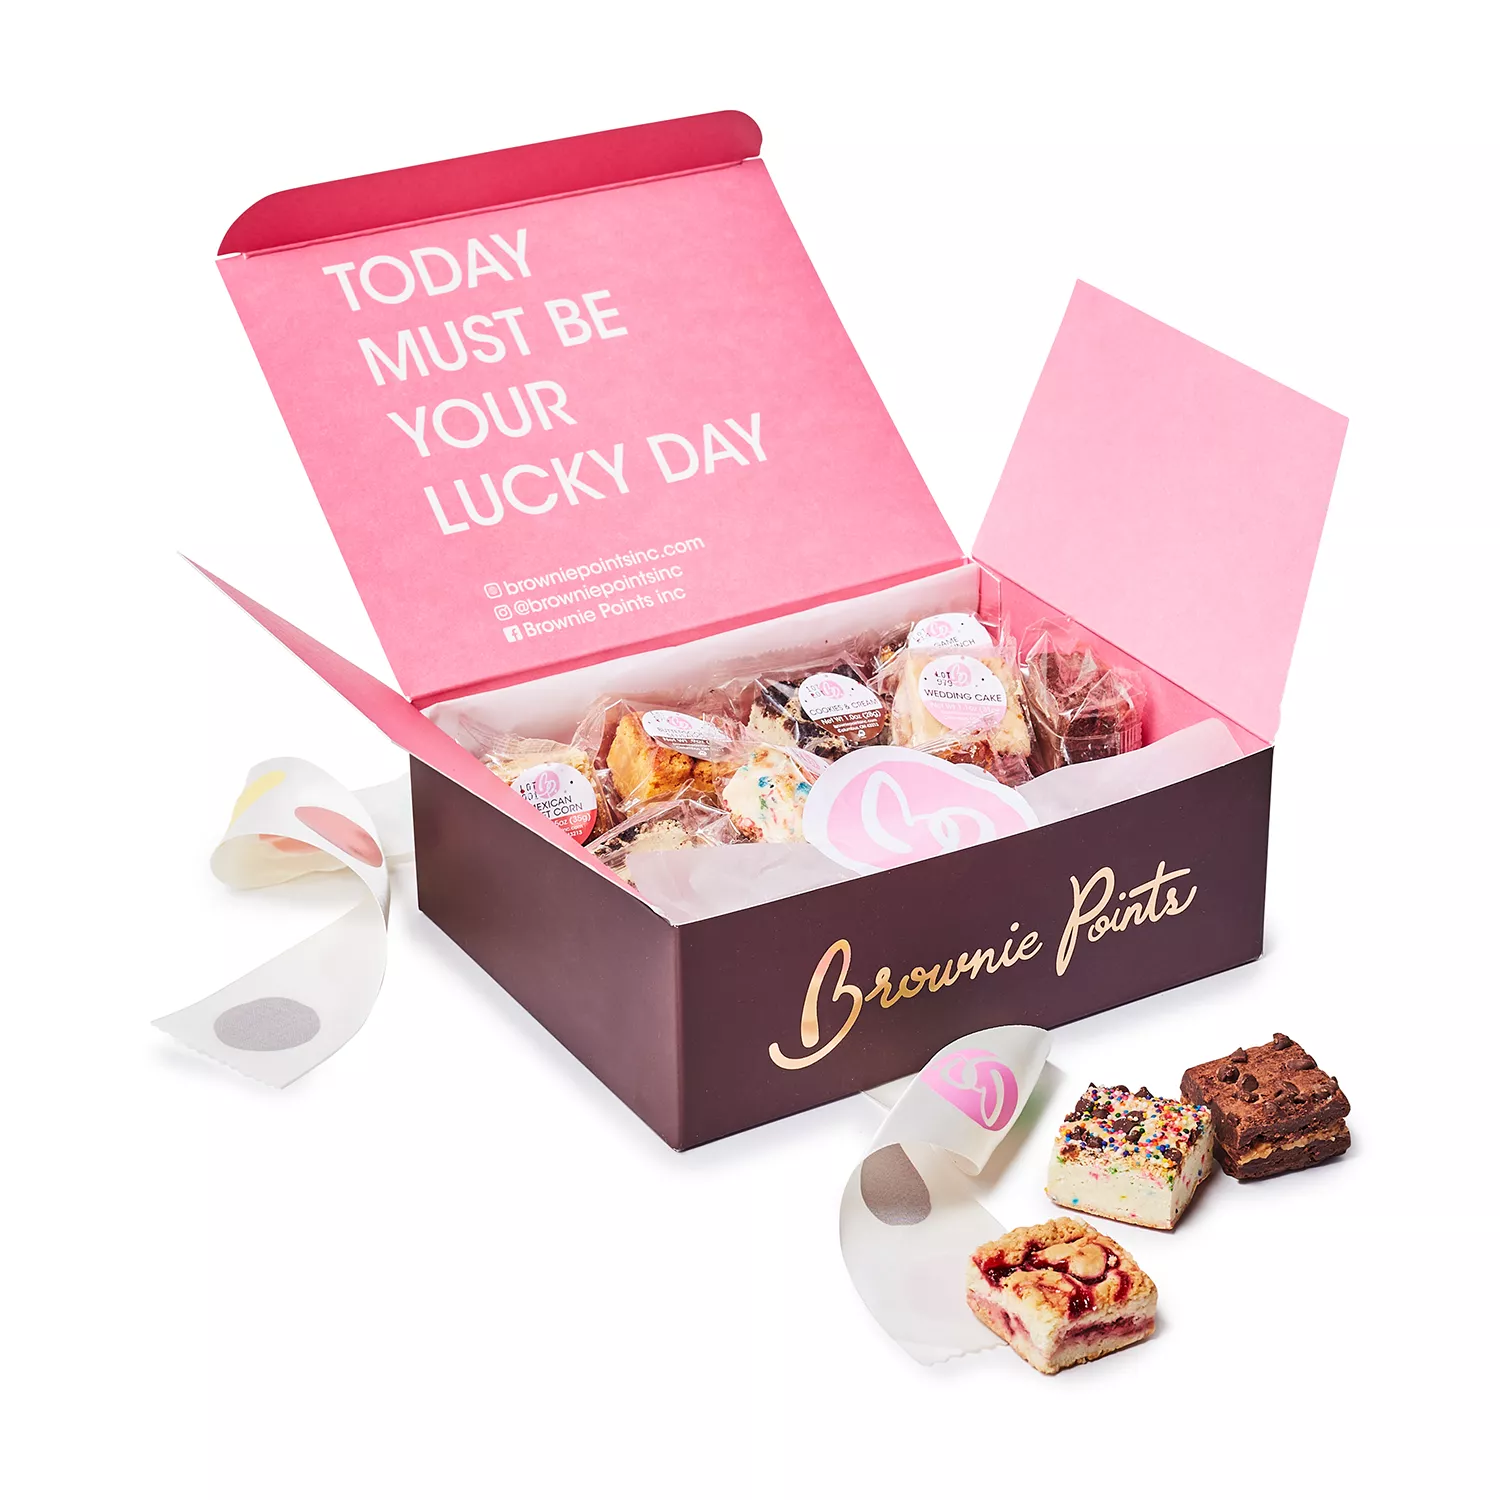 Brownie Points Baby Brownies Gift Box, 30 Pieces